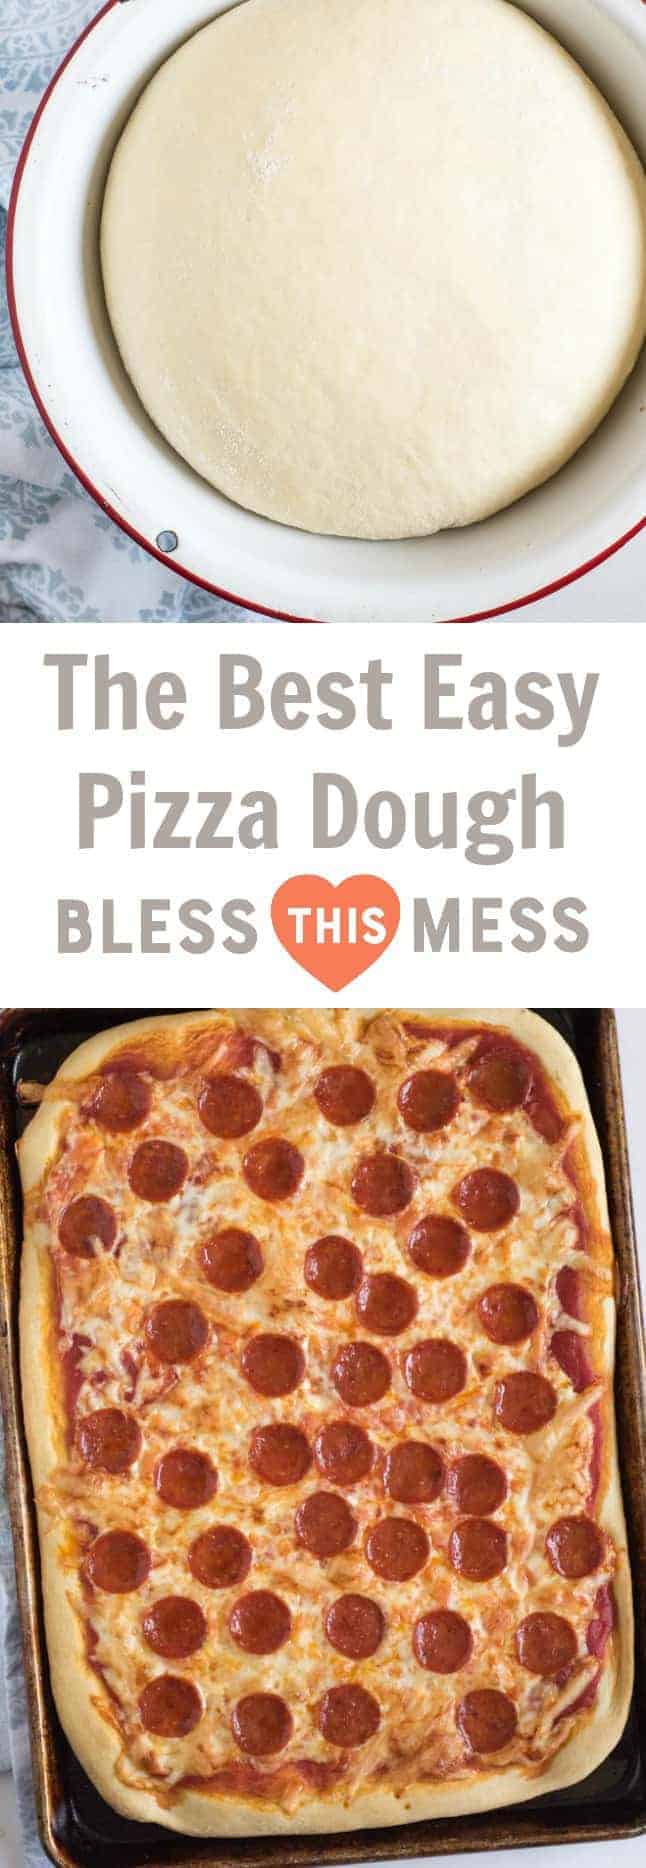 The best easy pizza dough recipes is made with only 6 simple ingredients and comes together in about 10 minutes. We use this dough for everything from traditional pizza to bread sticks and more! 